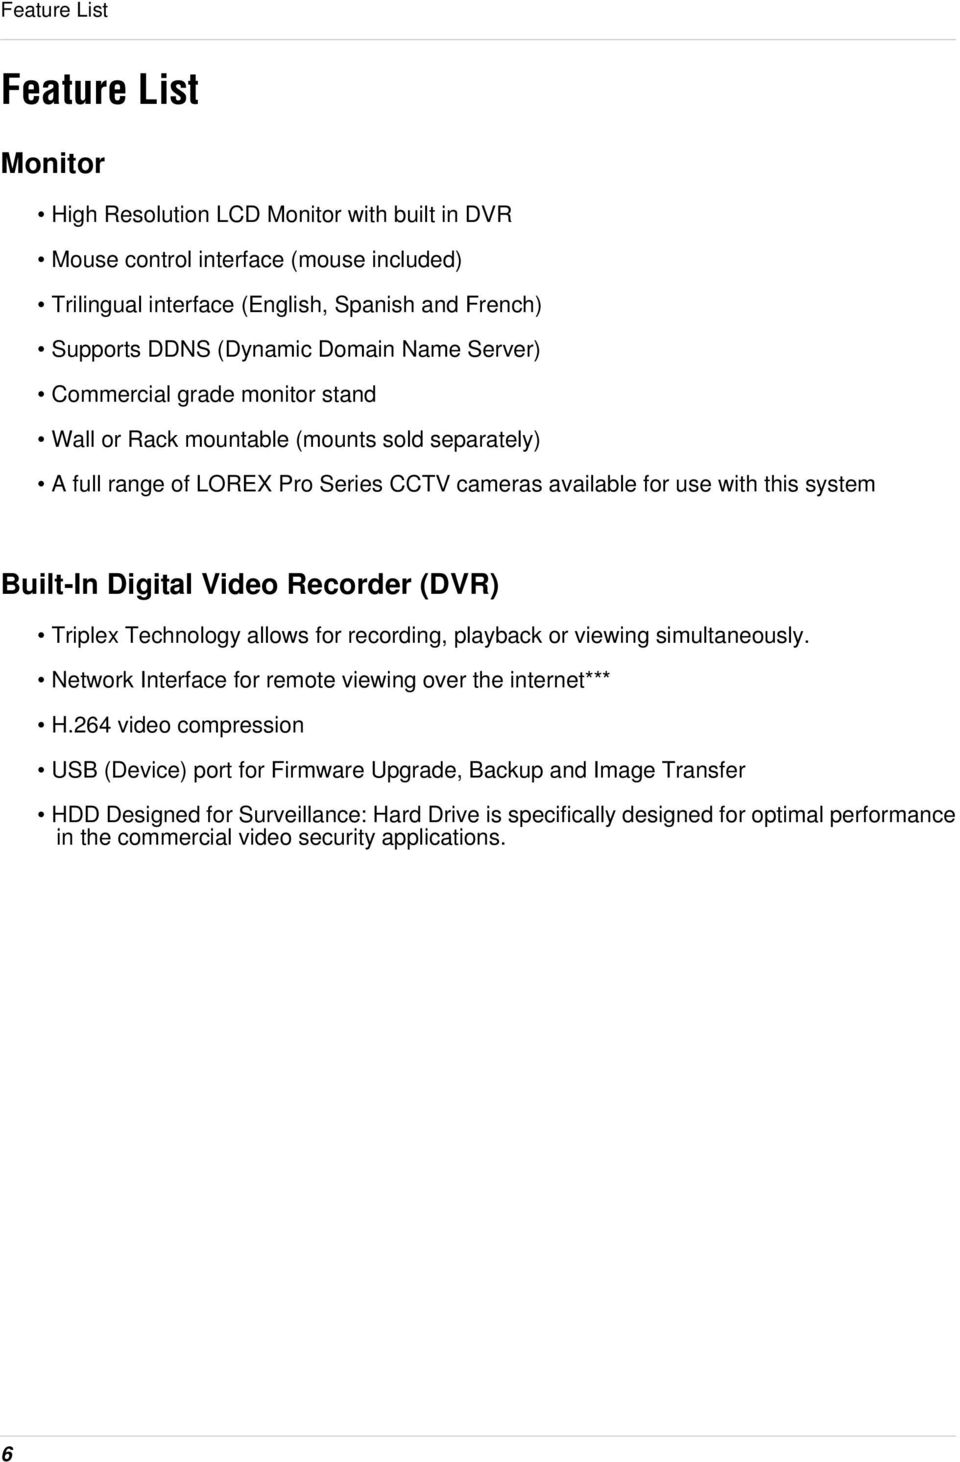 Digital Video Recorder (DVR) Triplex Technology allows for recording, playback or viewing simultaneously. Network Interface for remote viewing over the internet*** H.